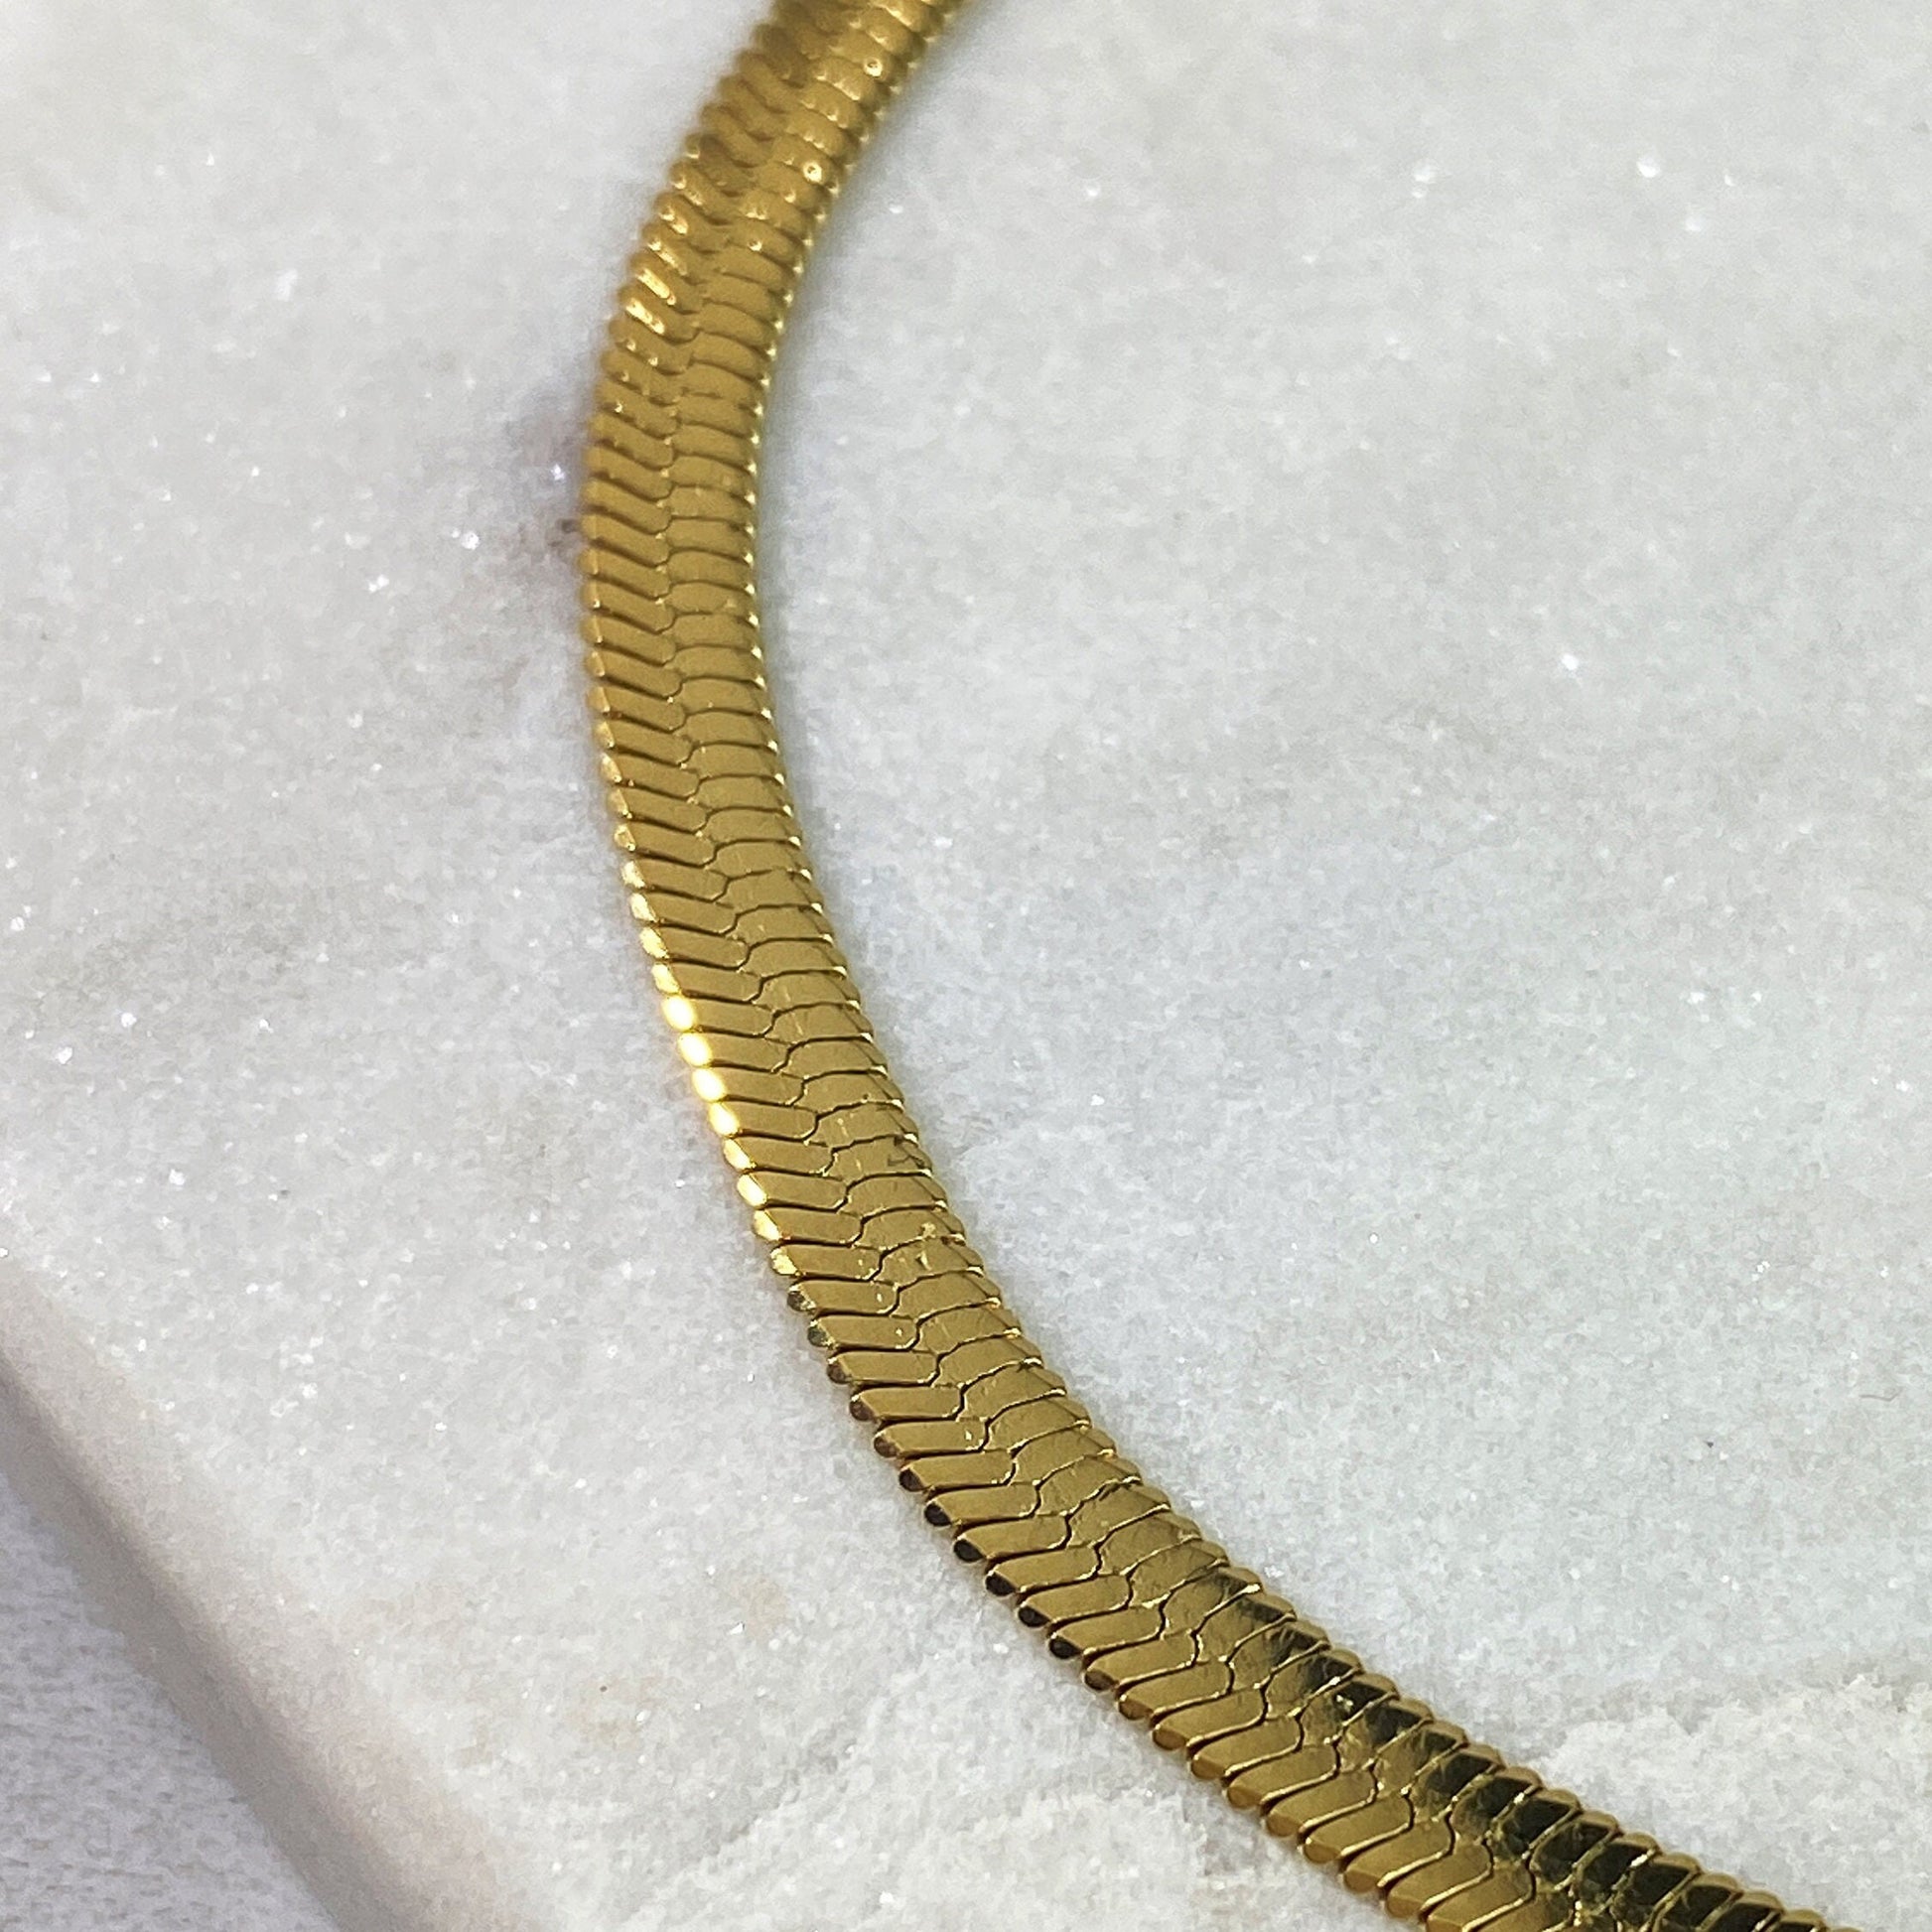 14k Gold Filled Plain Herringbone Link Anklet 4mm or 6mm Thickness Wholesale Jewelry Making Supplies